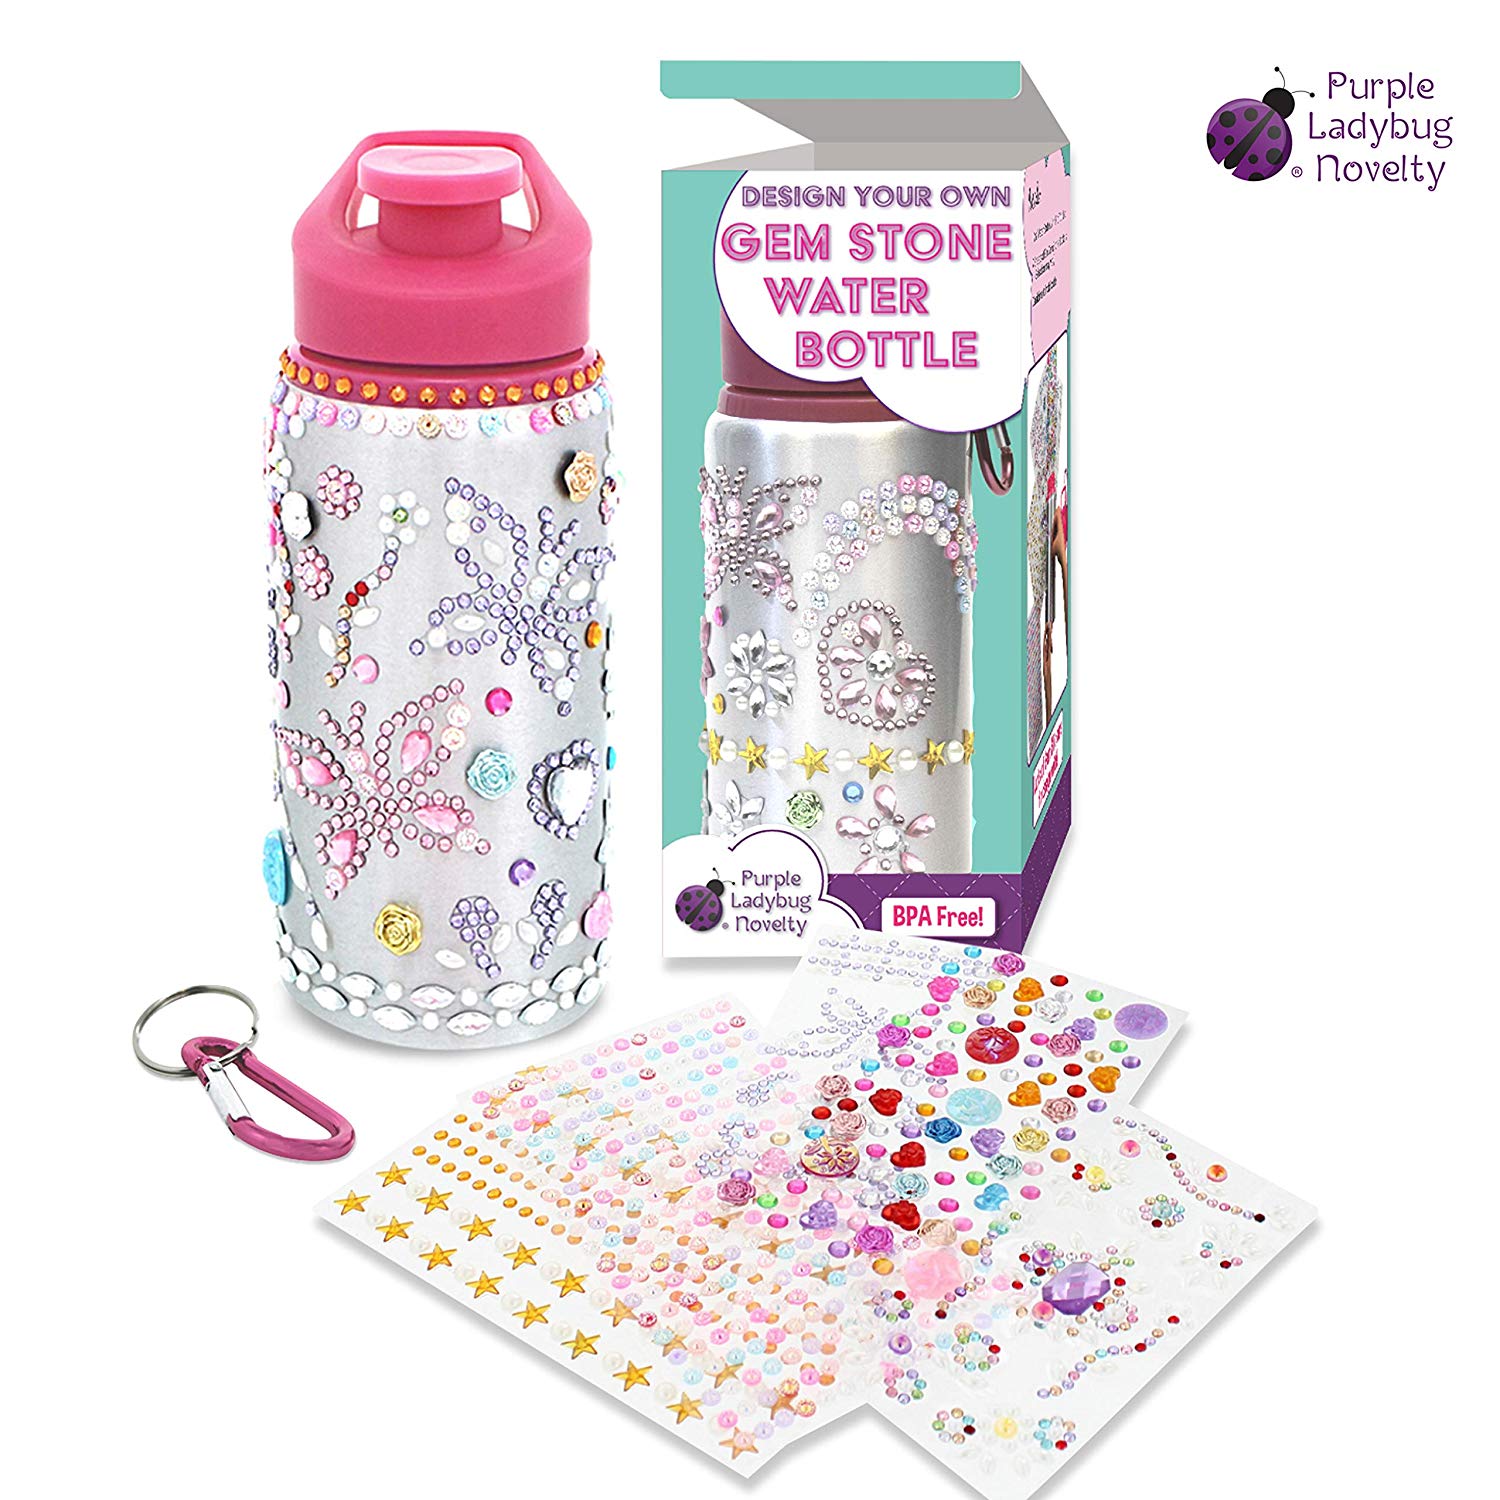 decorate personalize your own water bottle